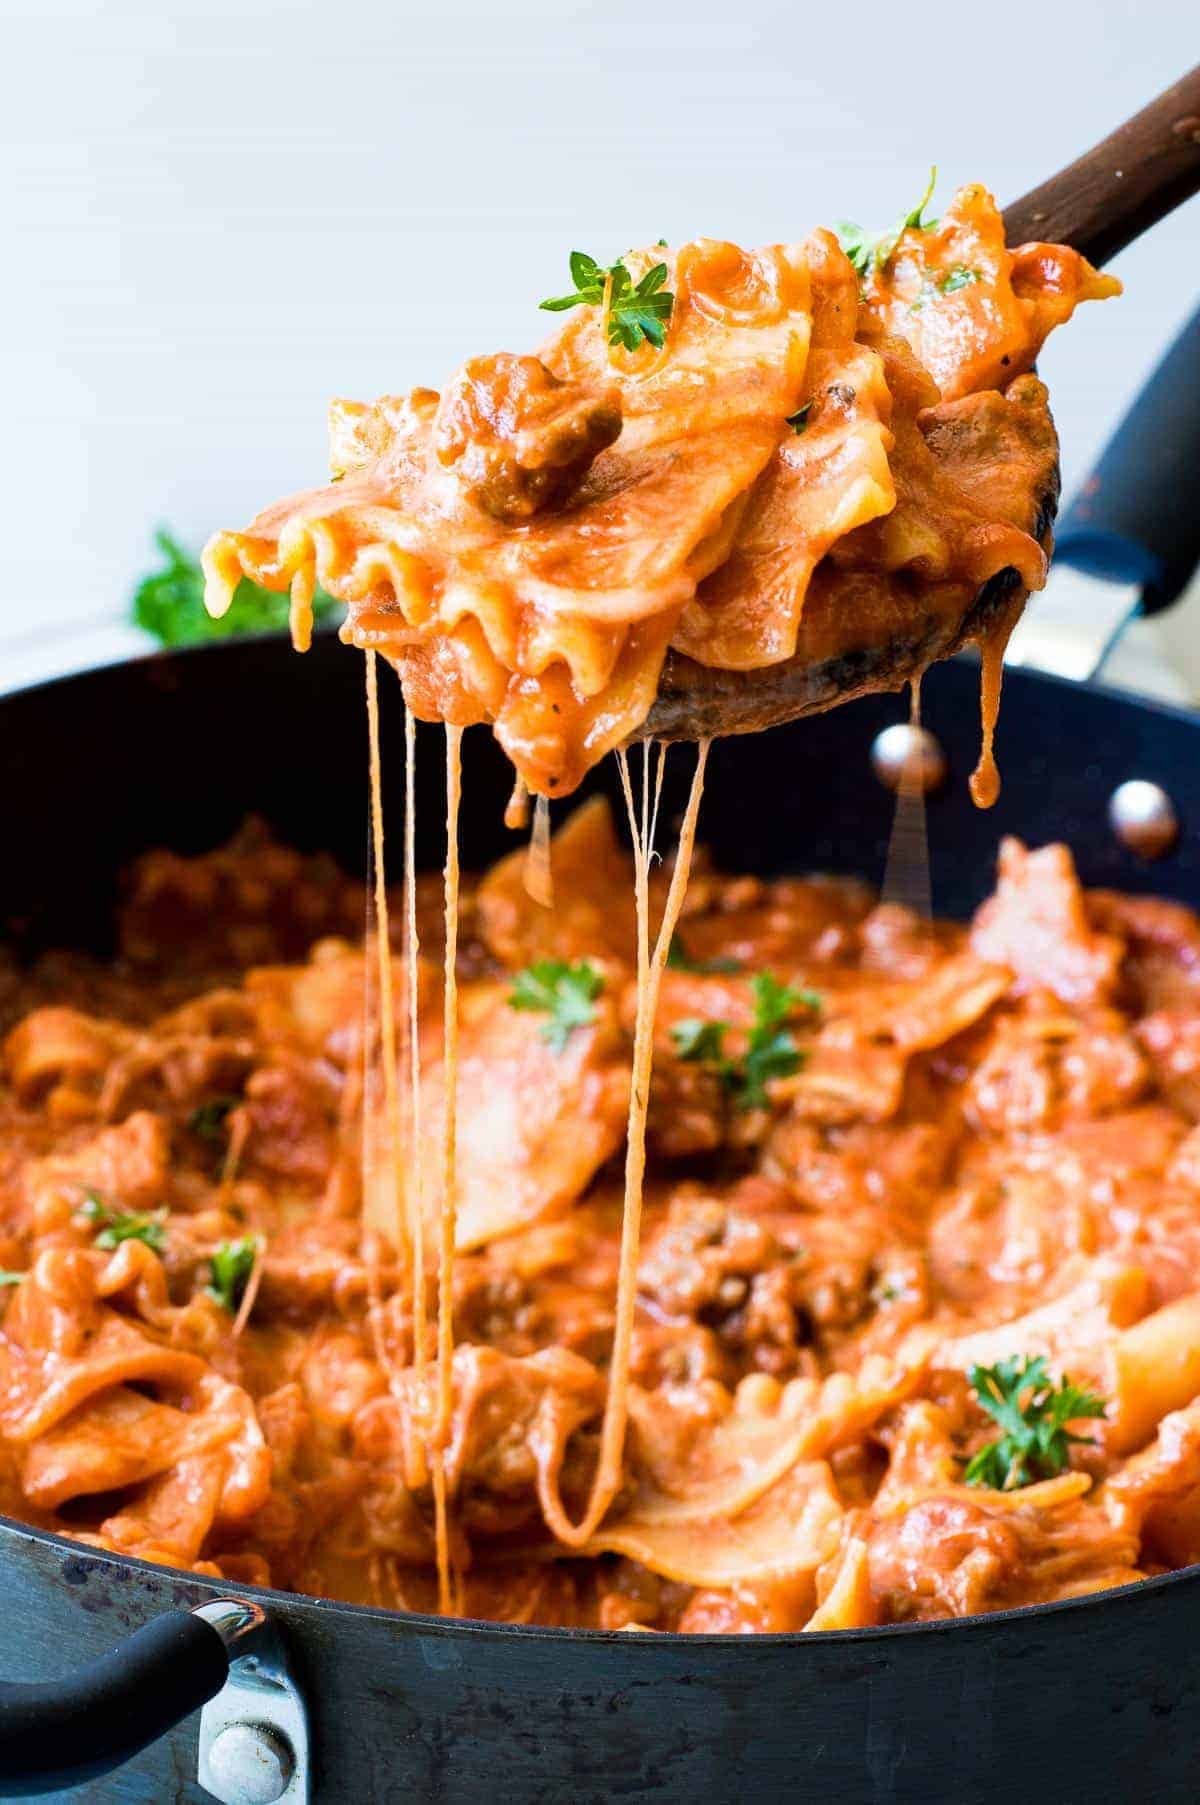 Easy Skillet Lasagna Recipe. This family dinner dish only takes 30 MINUTES and ONE POT to make! This ultimate comforting and cheesy meal is so much easier than making a conventional lasagna. After you try this version you will never need another lasagna recipe!